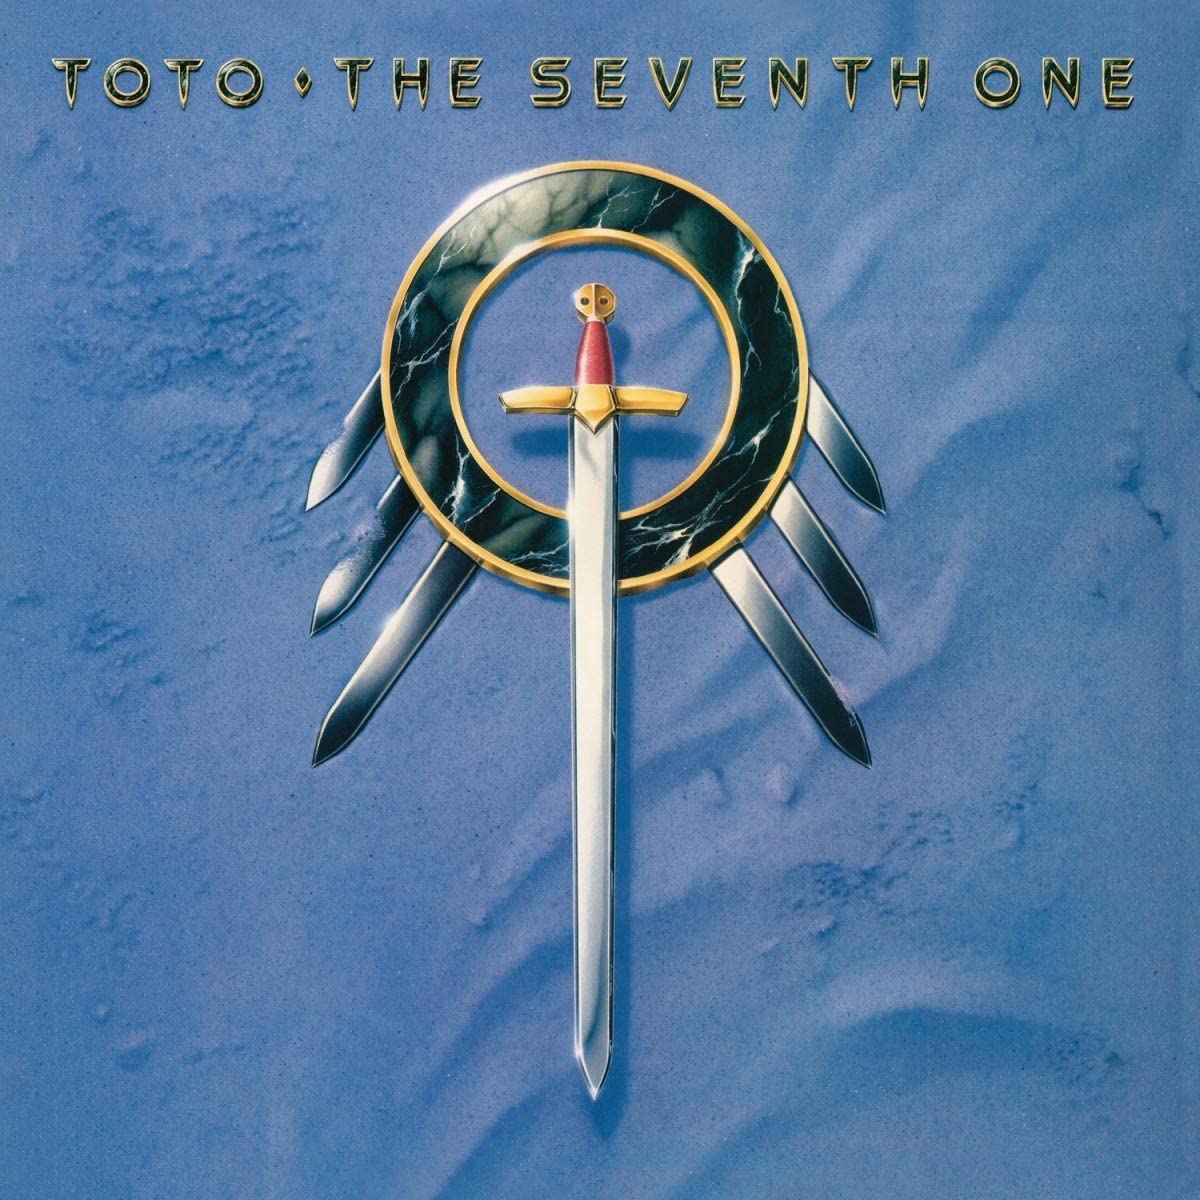 The Seventh One - Vinyl | Toto image0